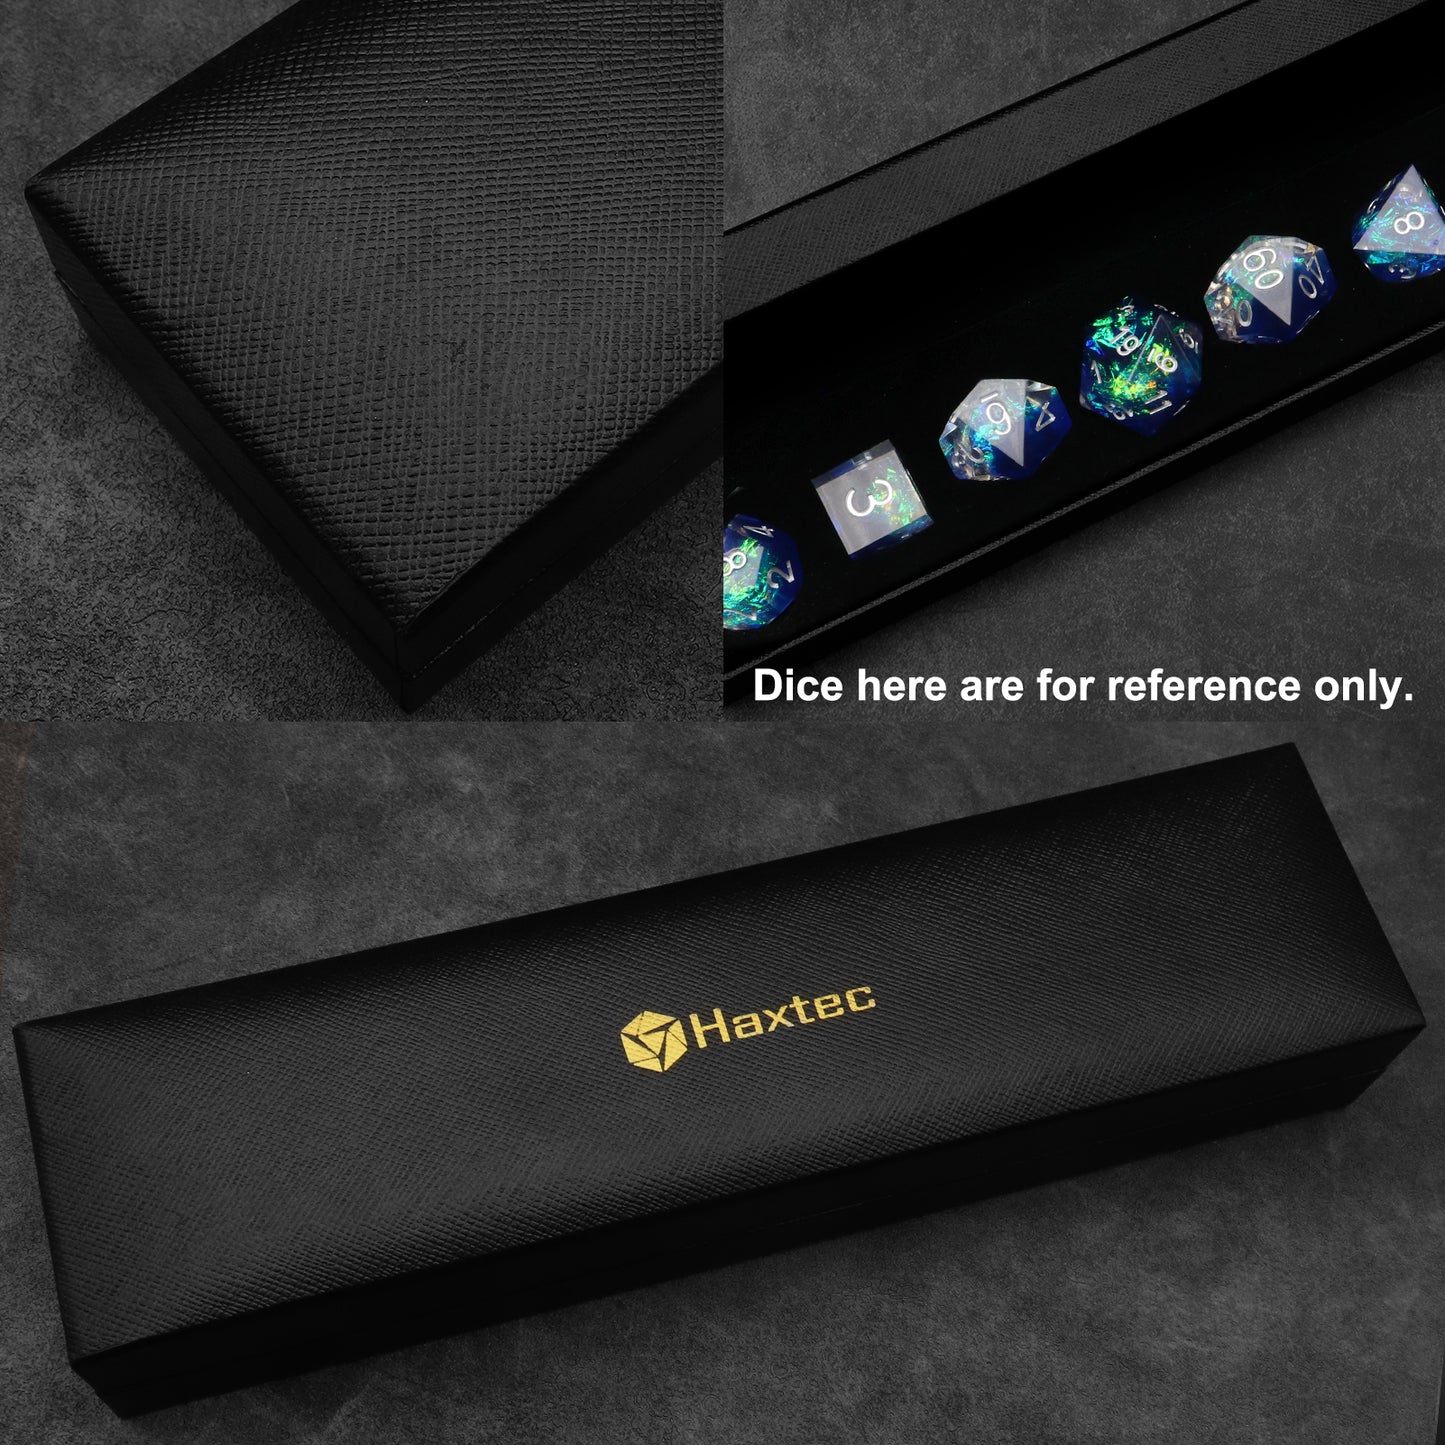 Water Blue Cat Eye Stone DND Dice Set with Premium Dice Case